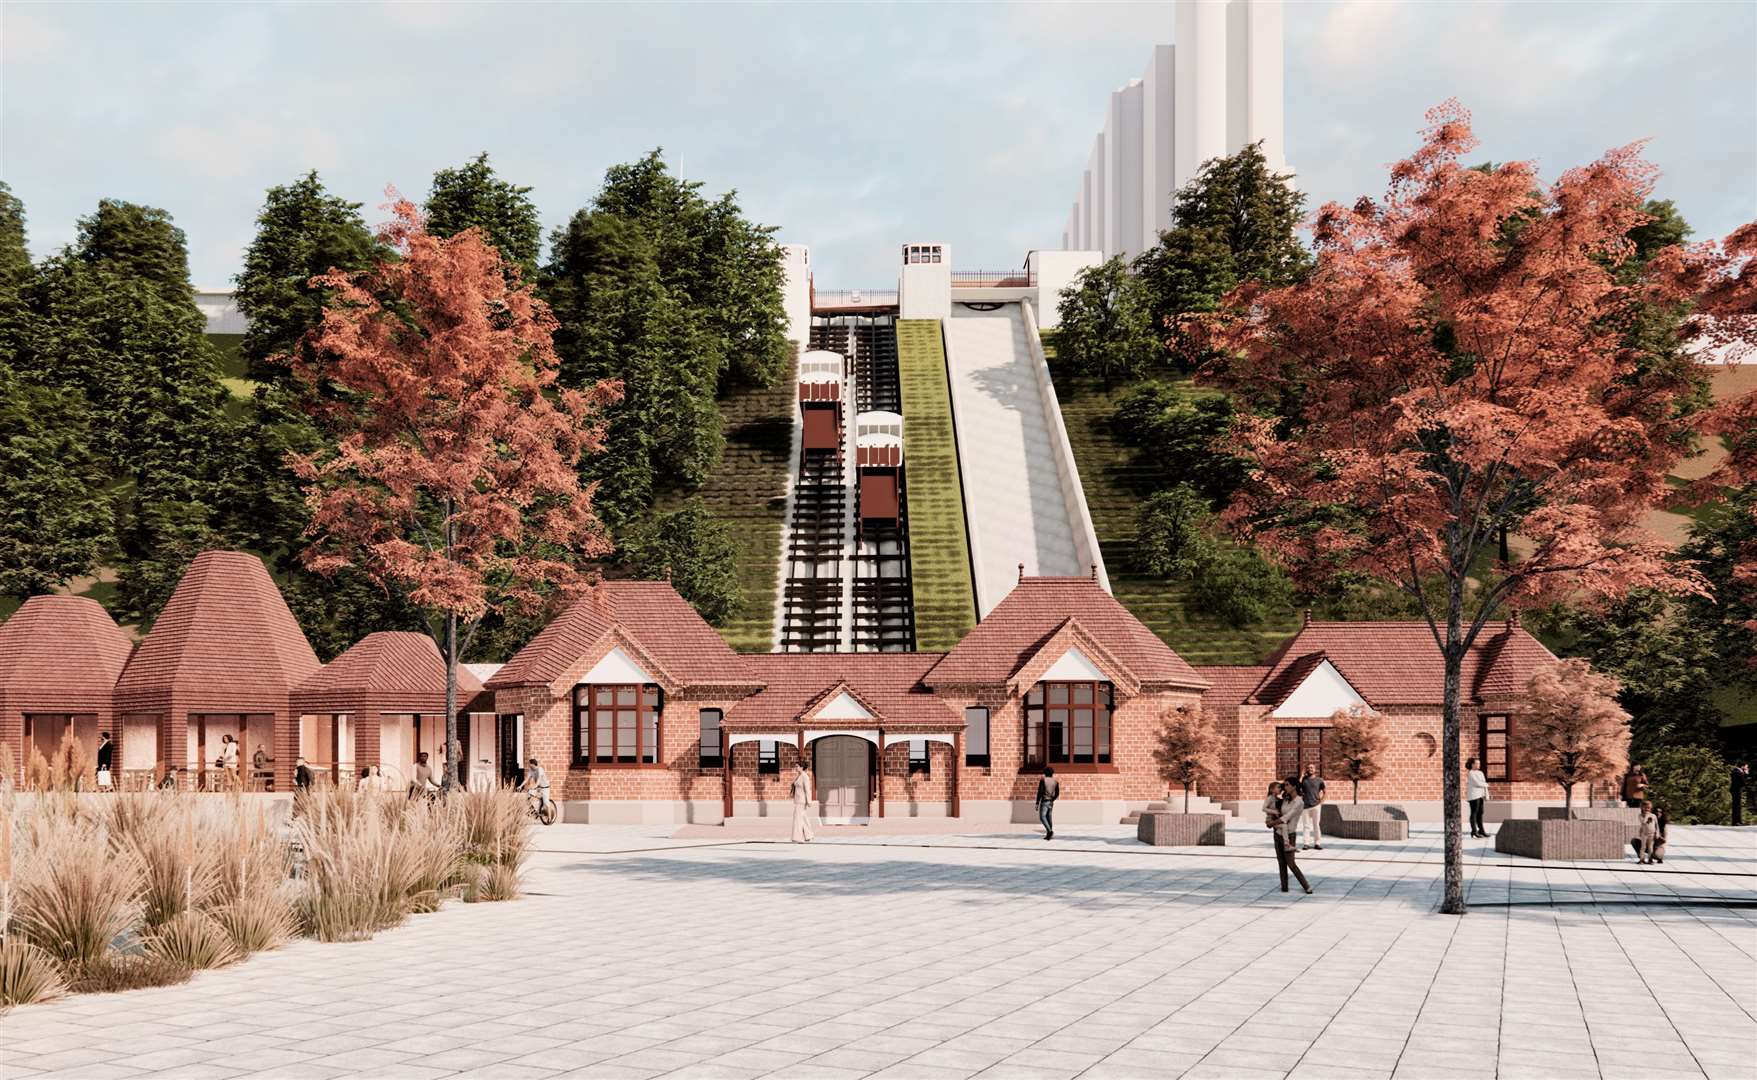 What the lift and surrounding area is expected to look like after the work. Picture: Folkestone Leas Lift